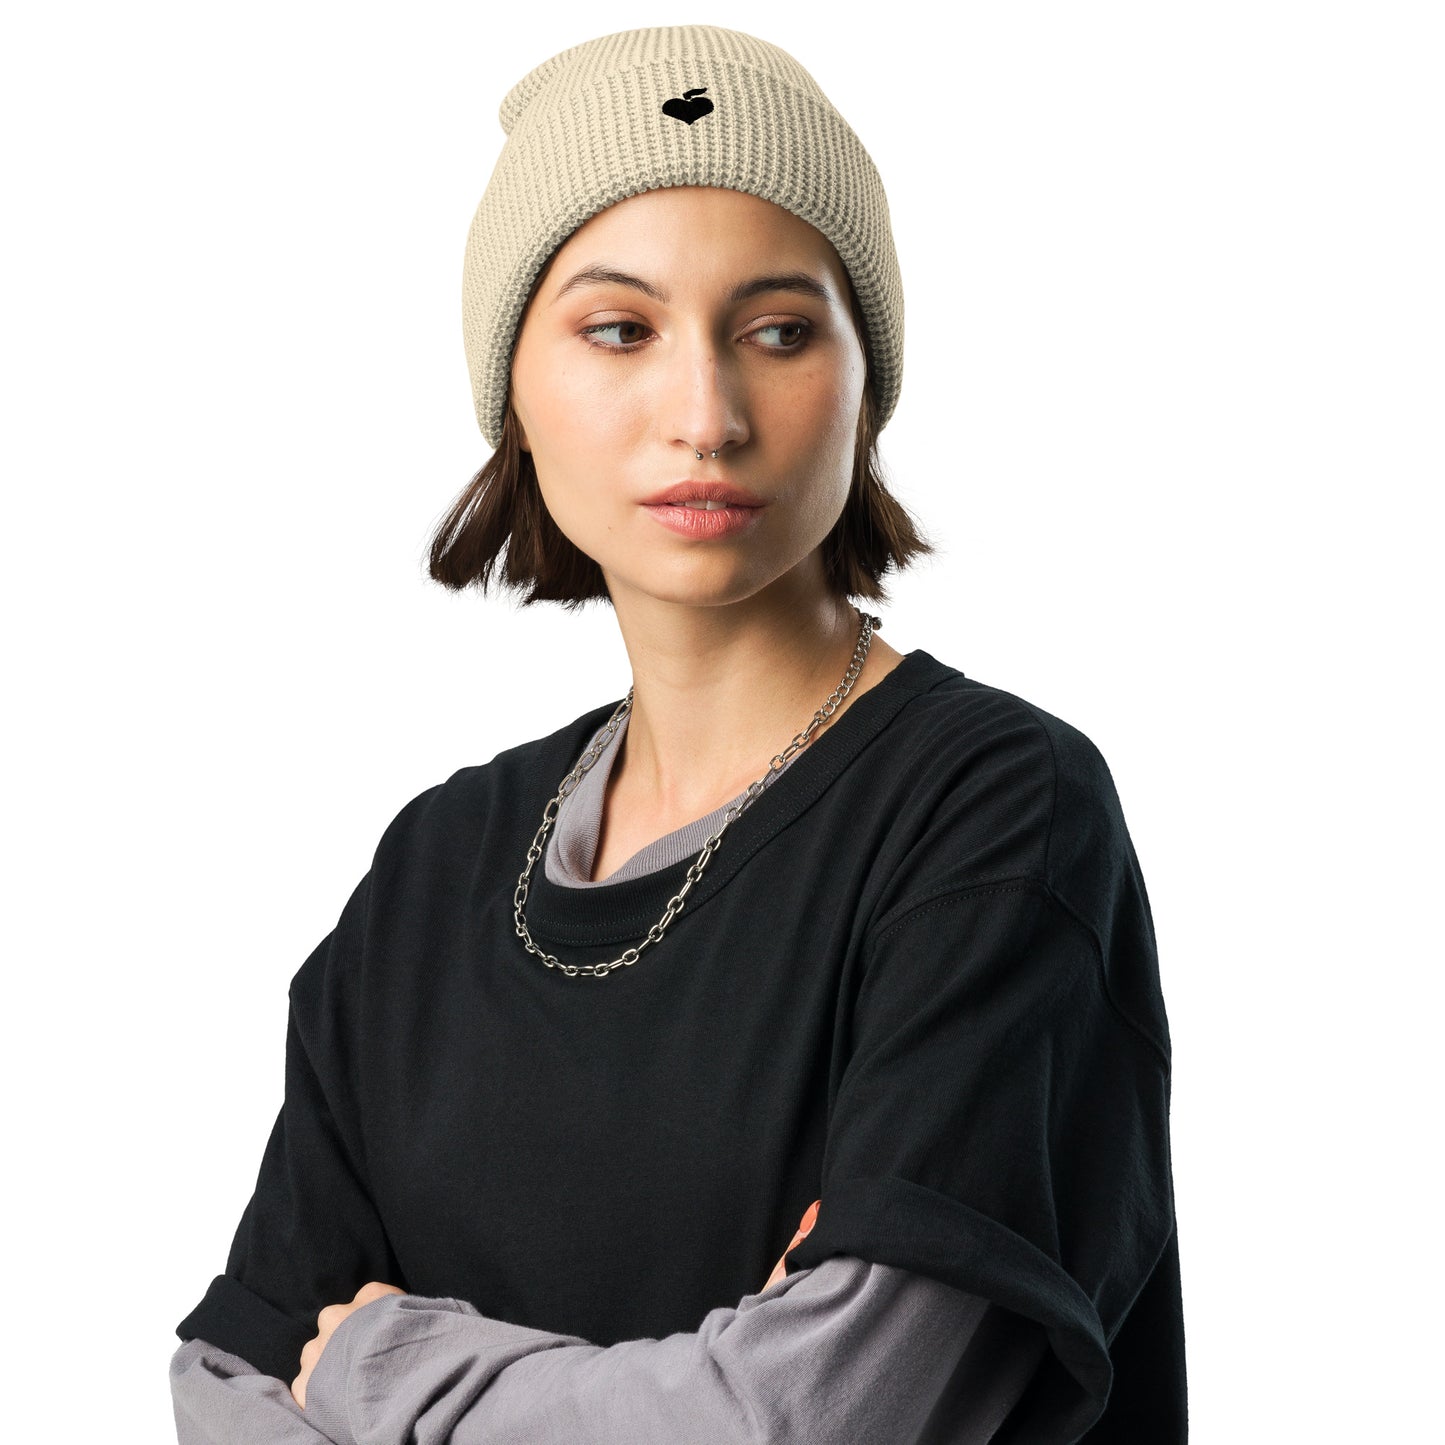 212 Heart Embroidered - Waffle beanie